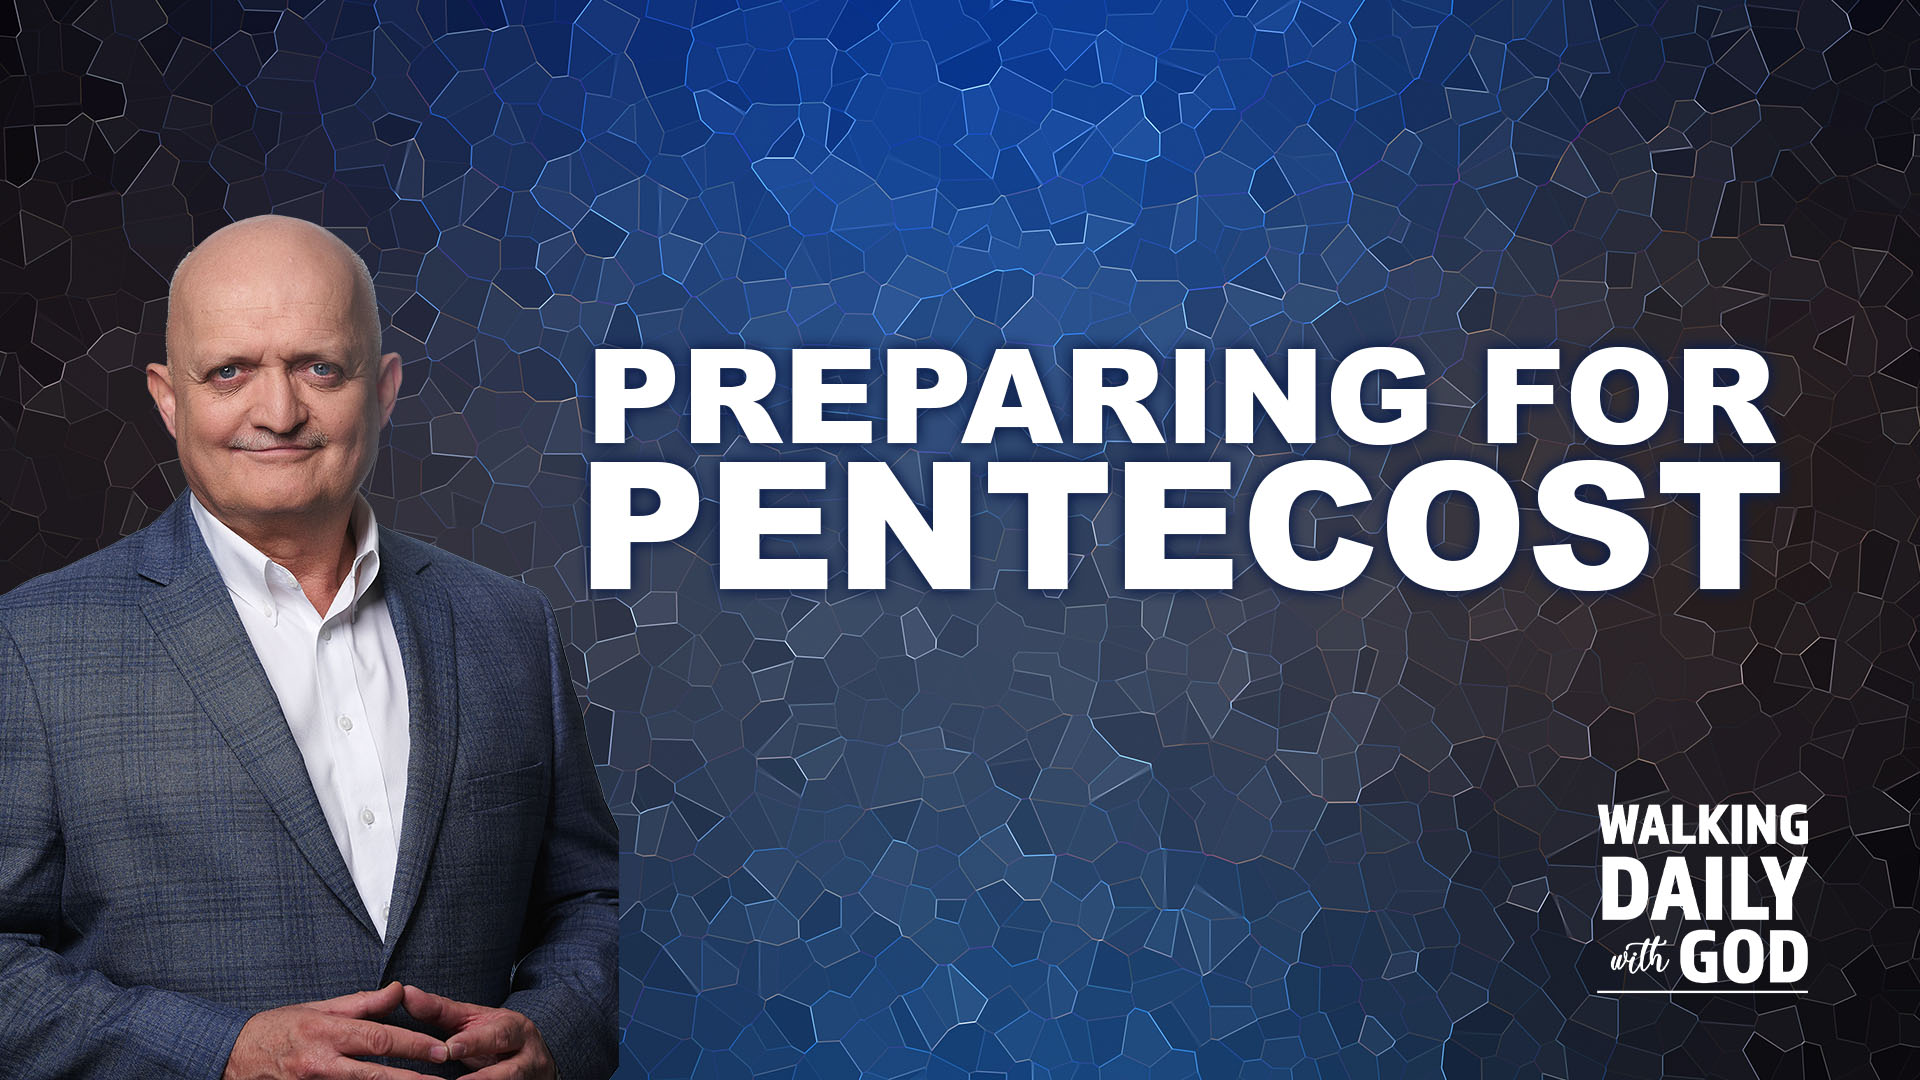 Preparing for Pentecost - The Holy Spirit Our Friend